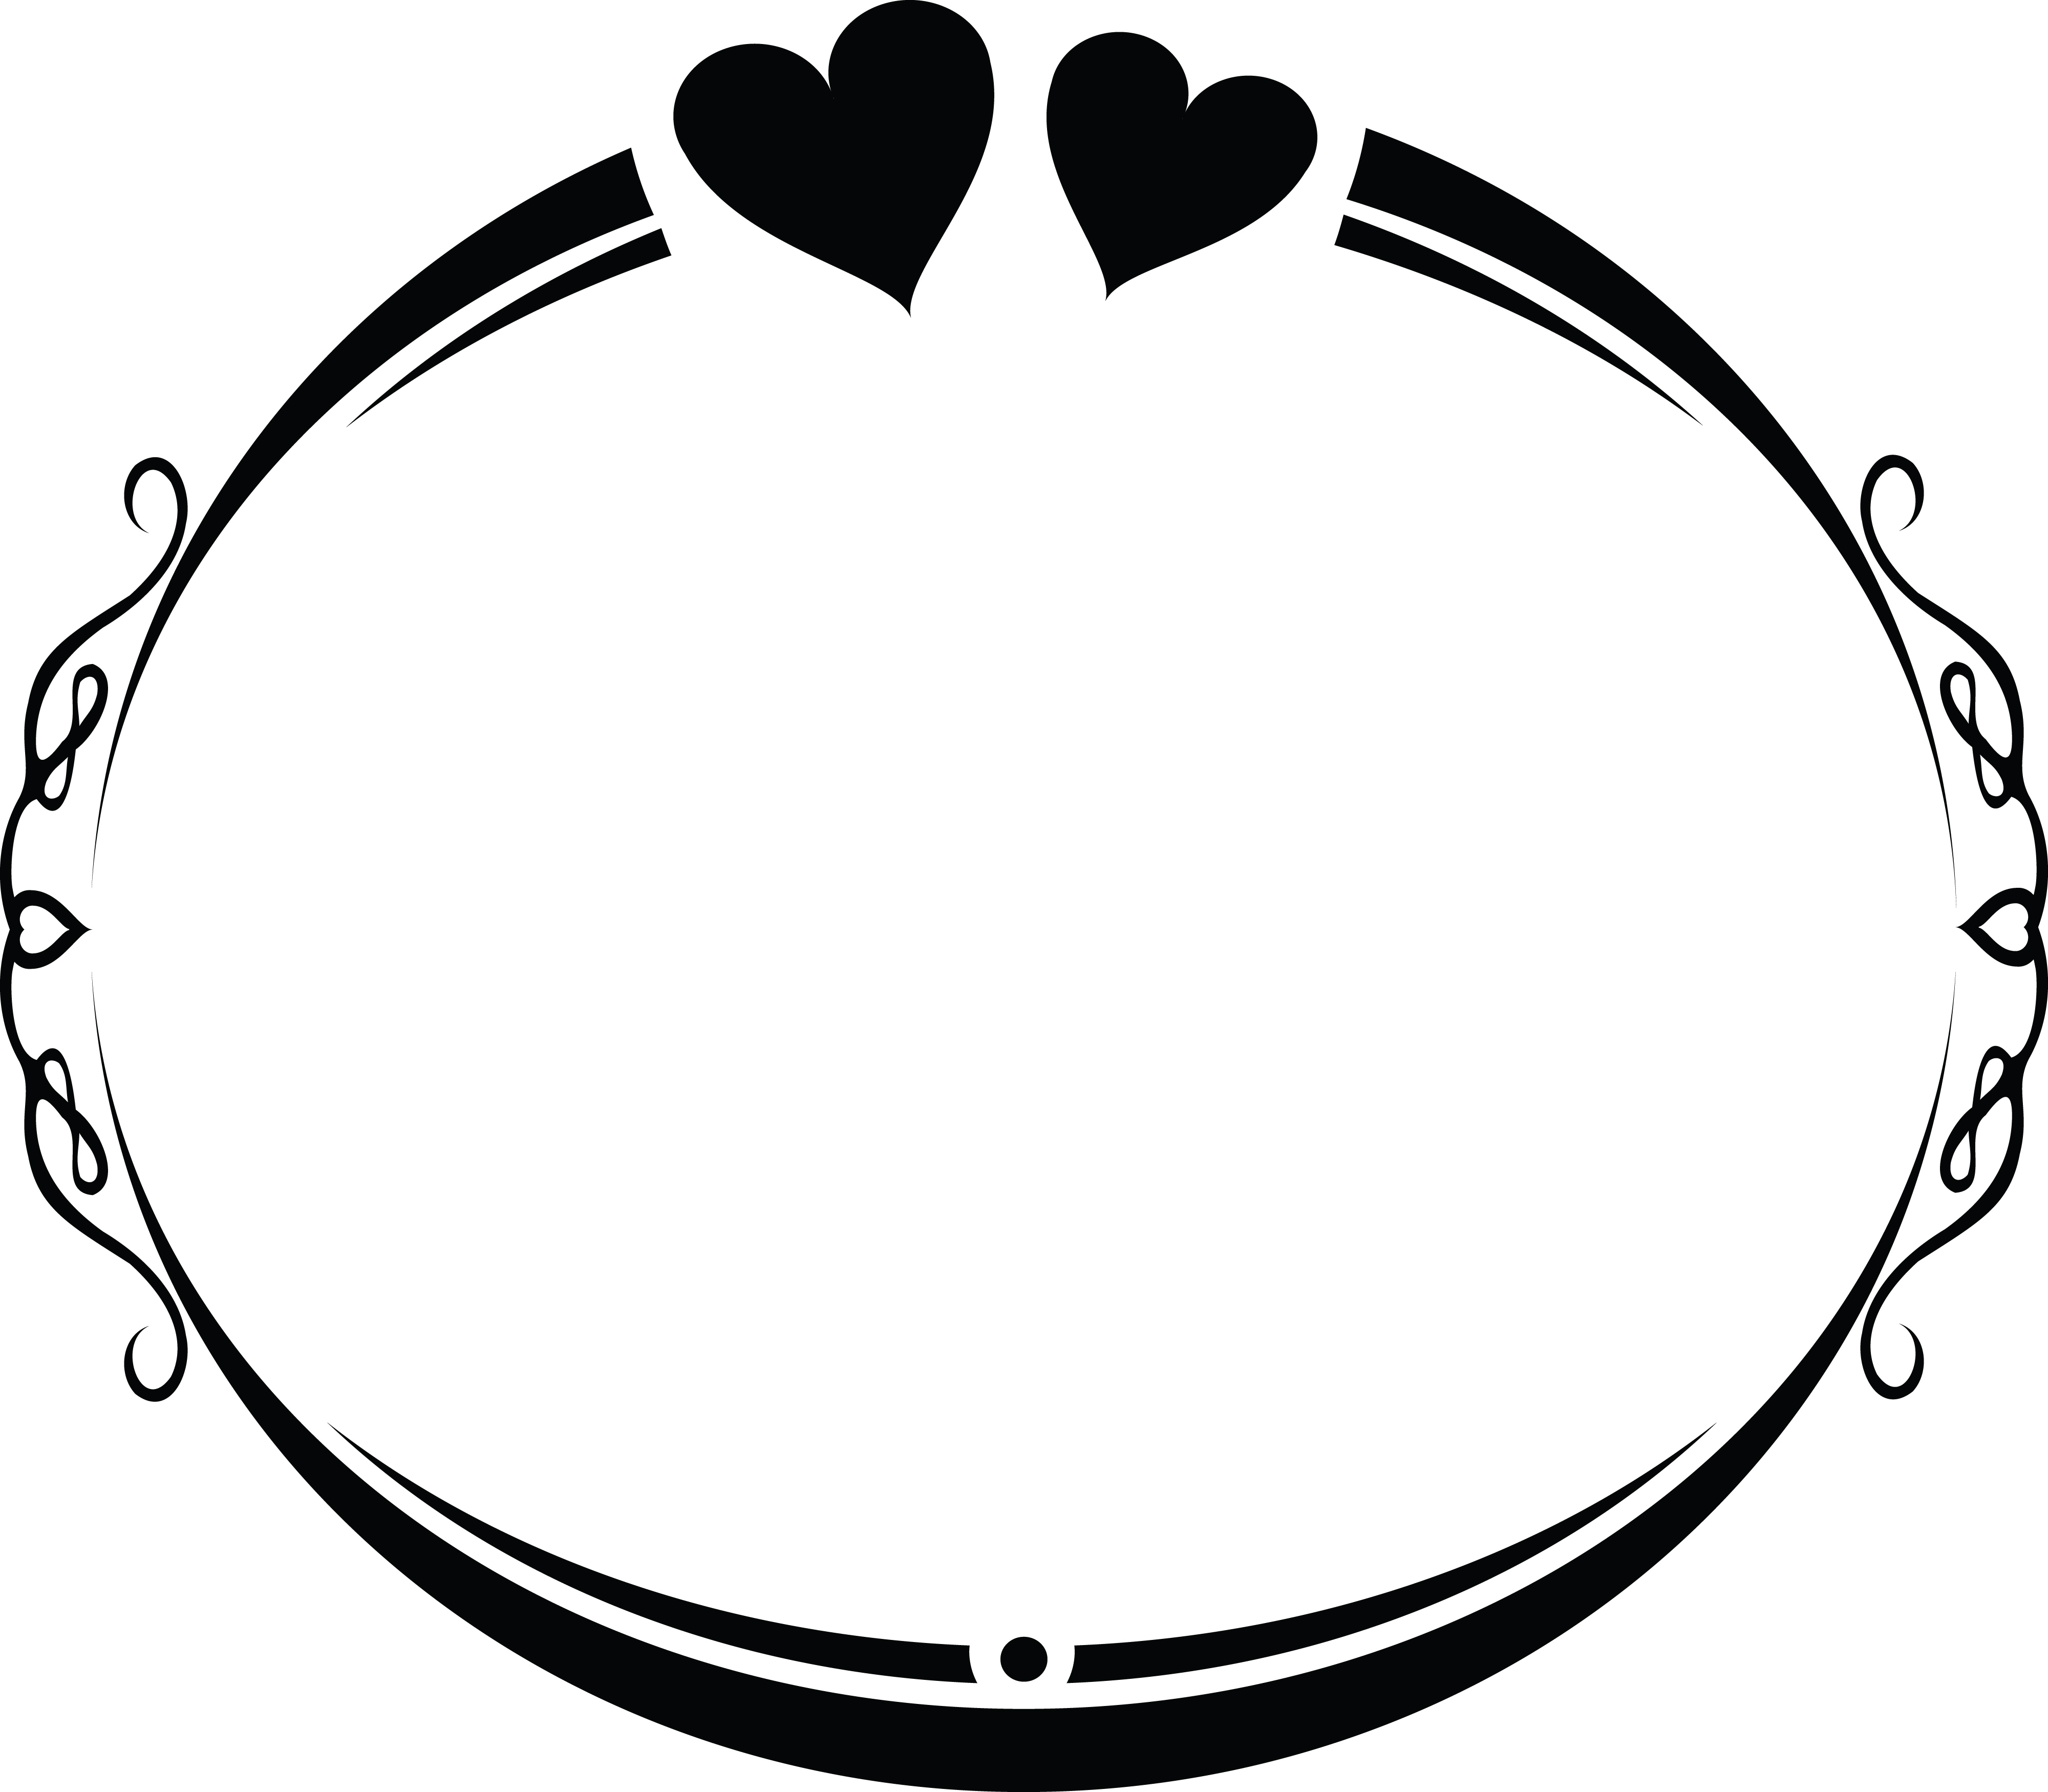 Free Clipart of an oval wedding frame design with love ...